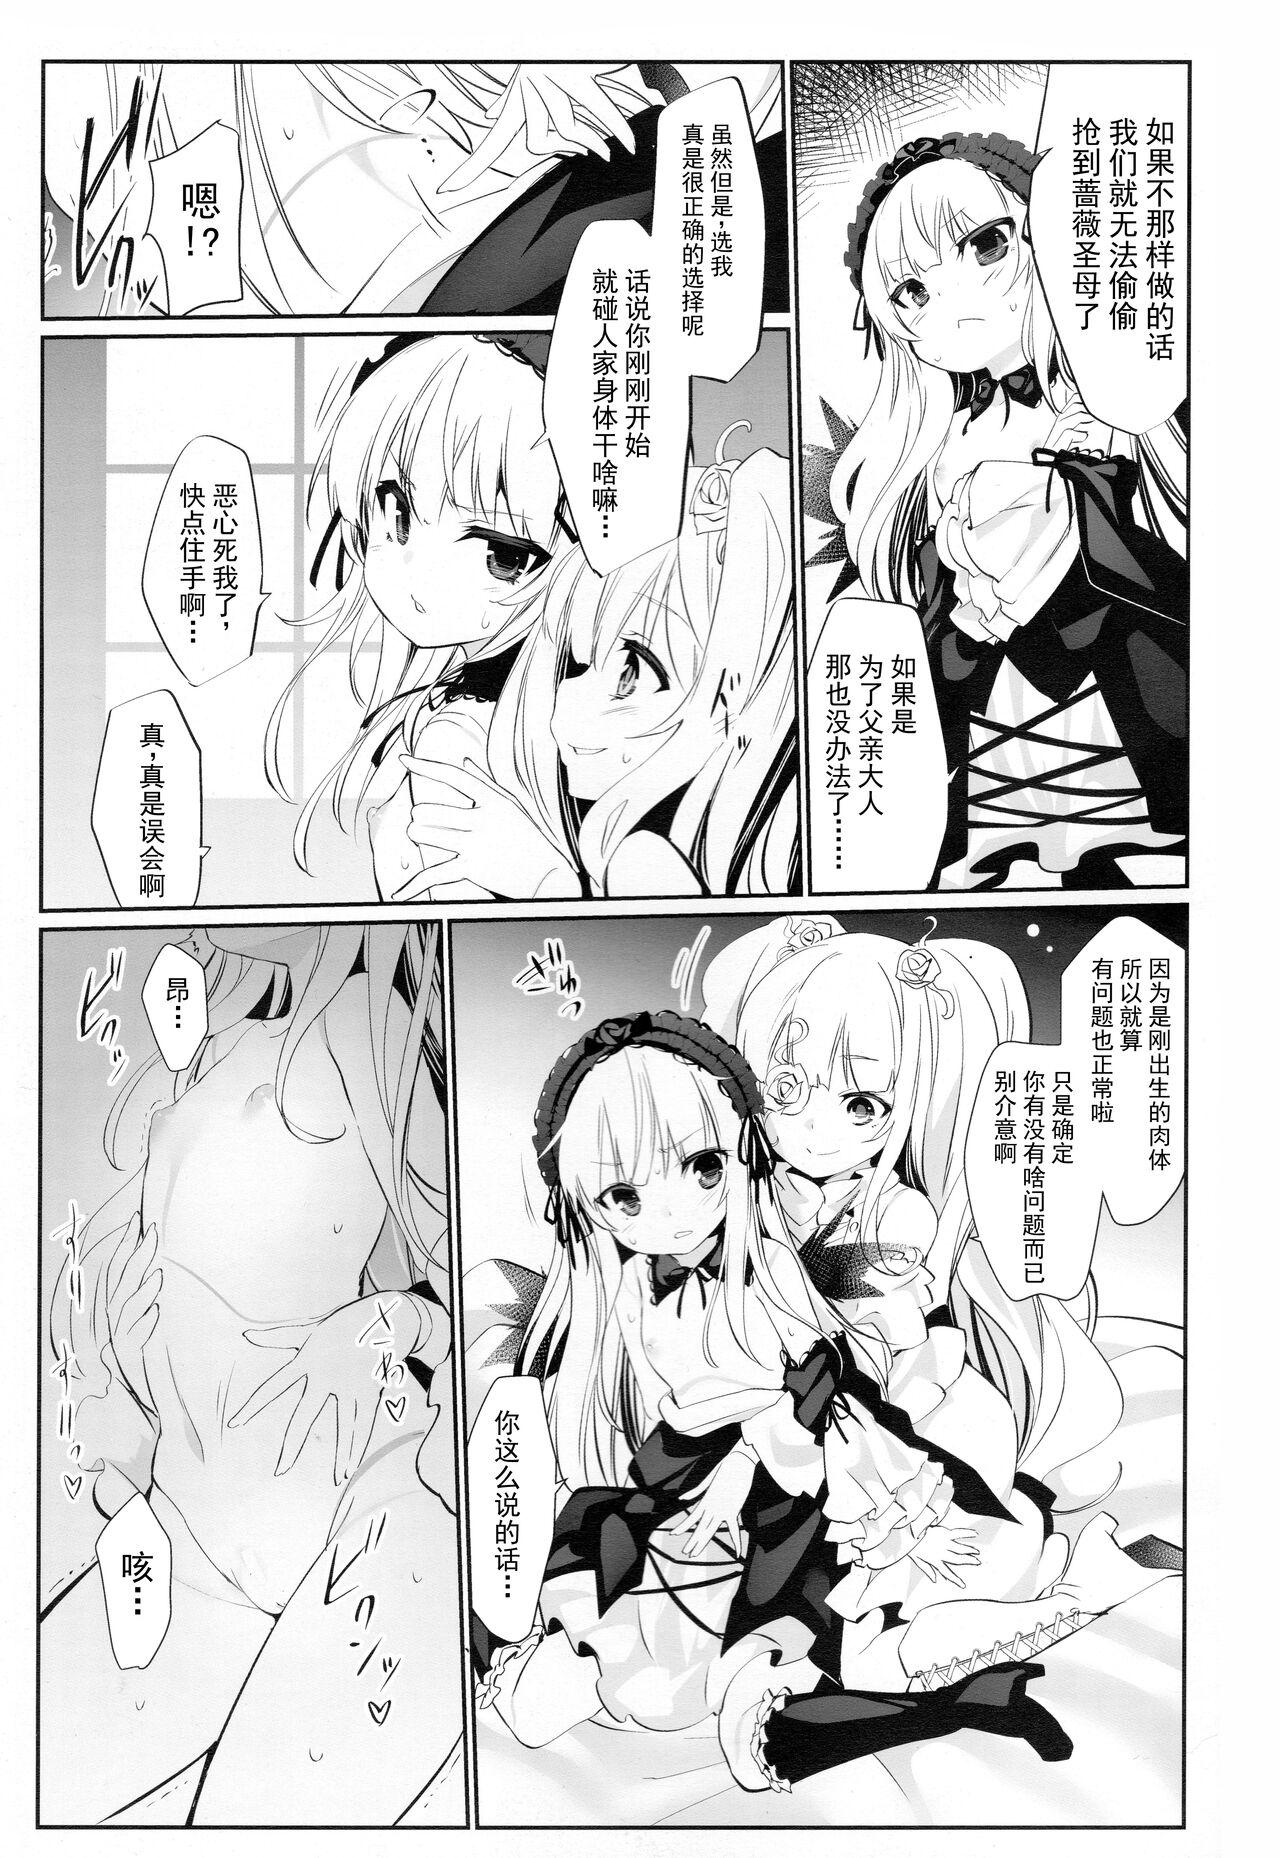 Lezbi Glamour Growth - Rozen maiden Family Taboo - Page 4